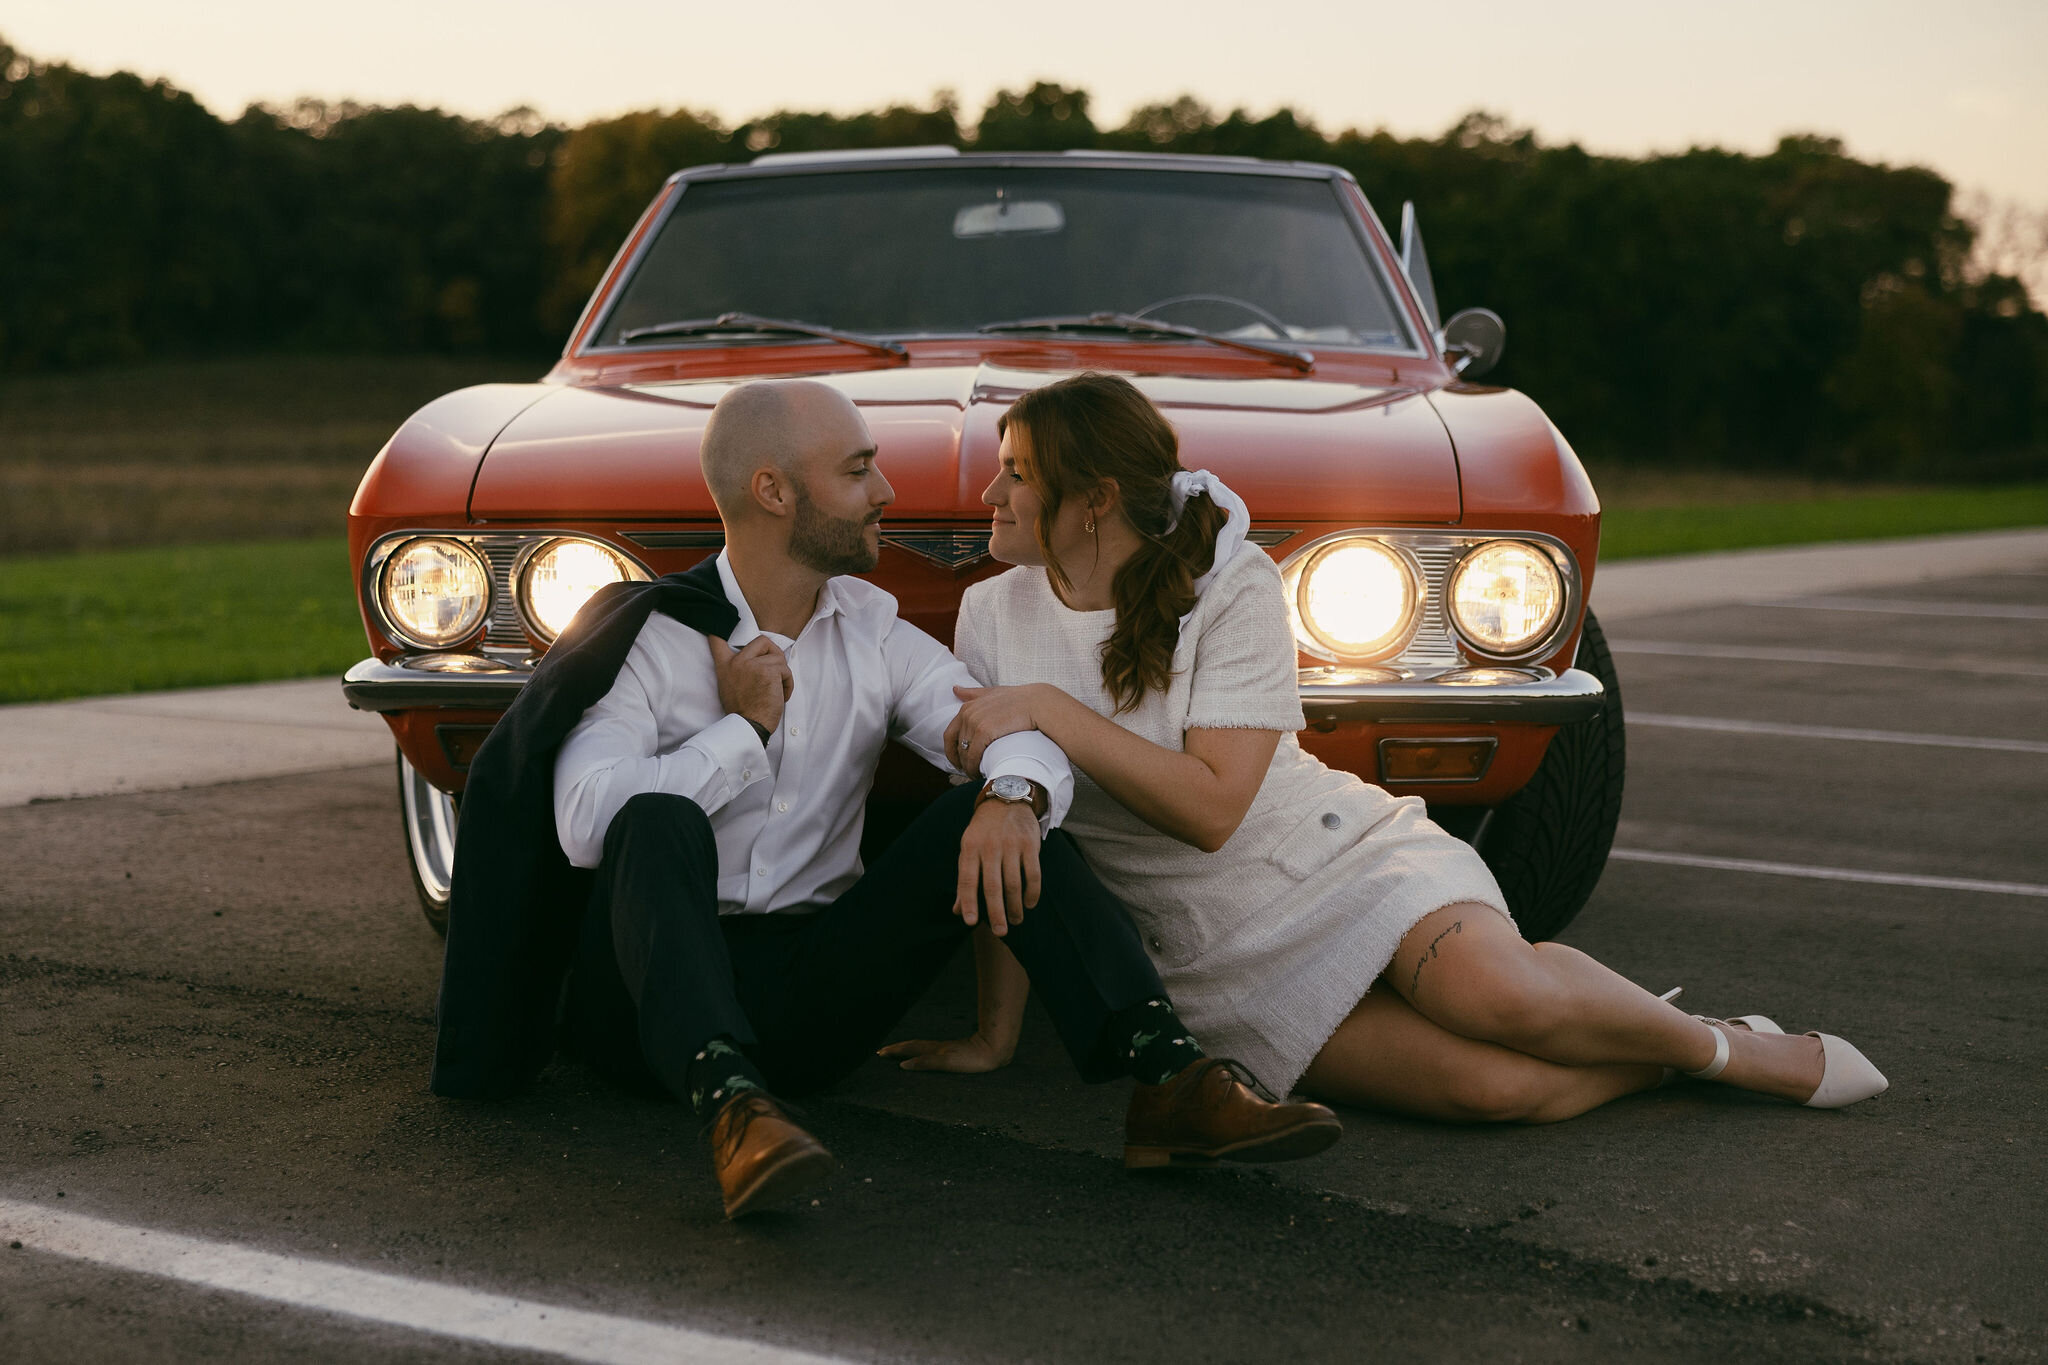 Amazing vintage looking engagement pictures with bride and groom sitting in front of a red classic car with its lights on, looking at each other smiling and touching arms